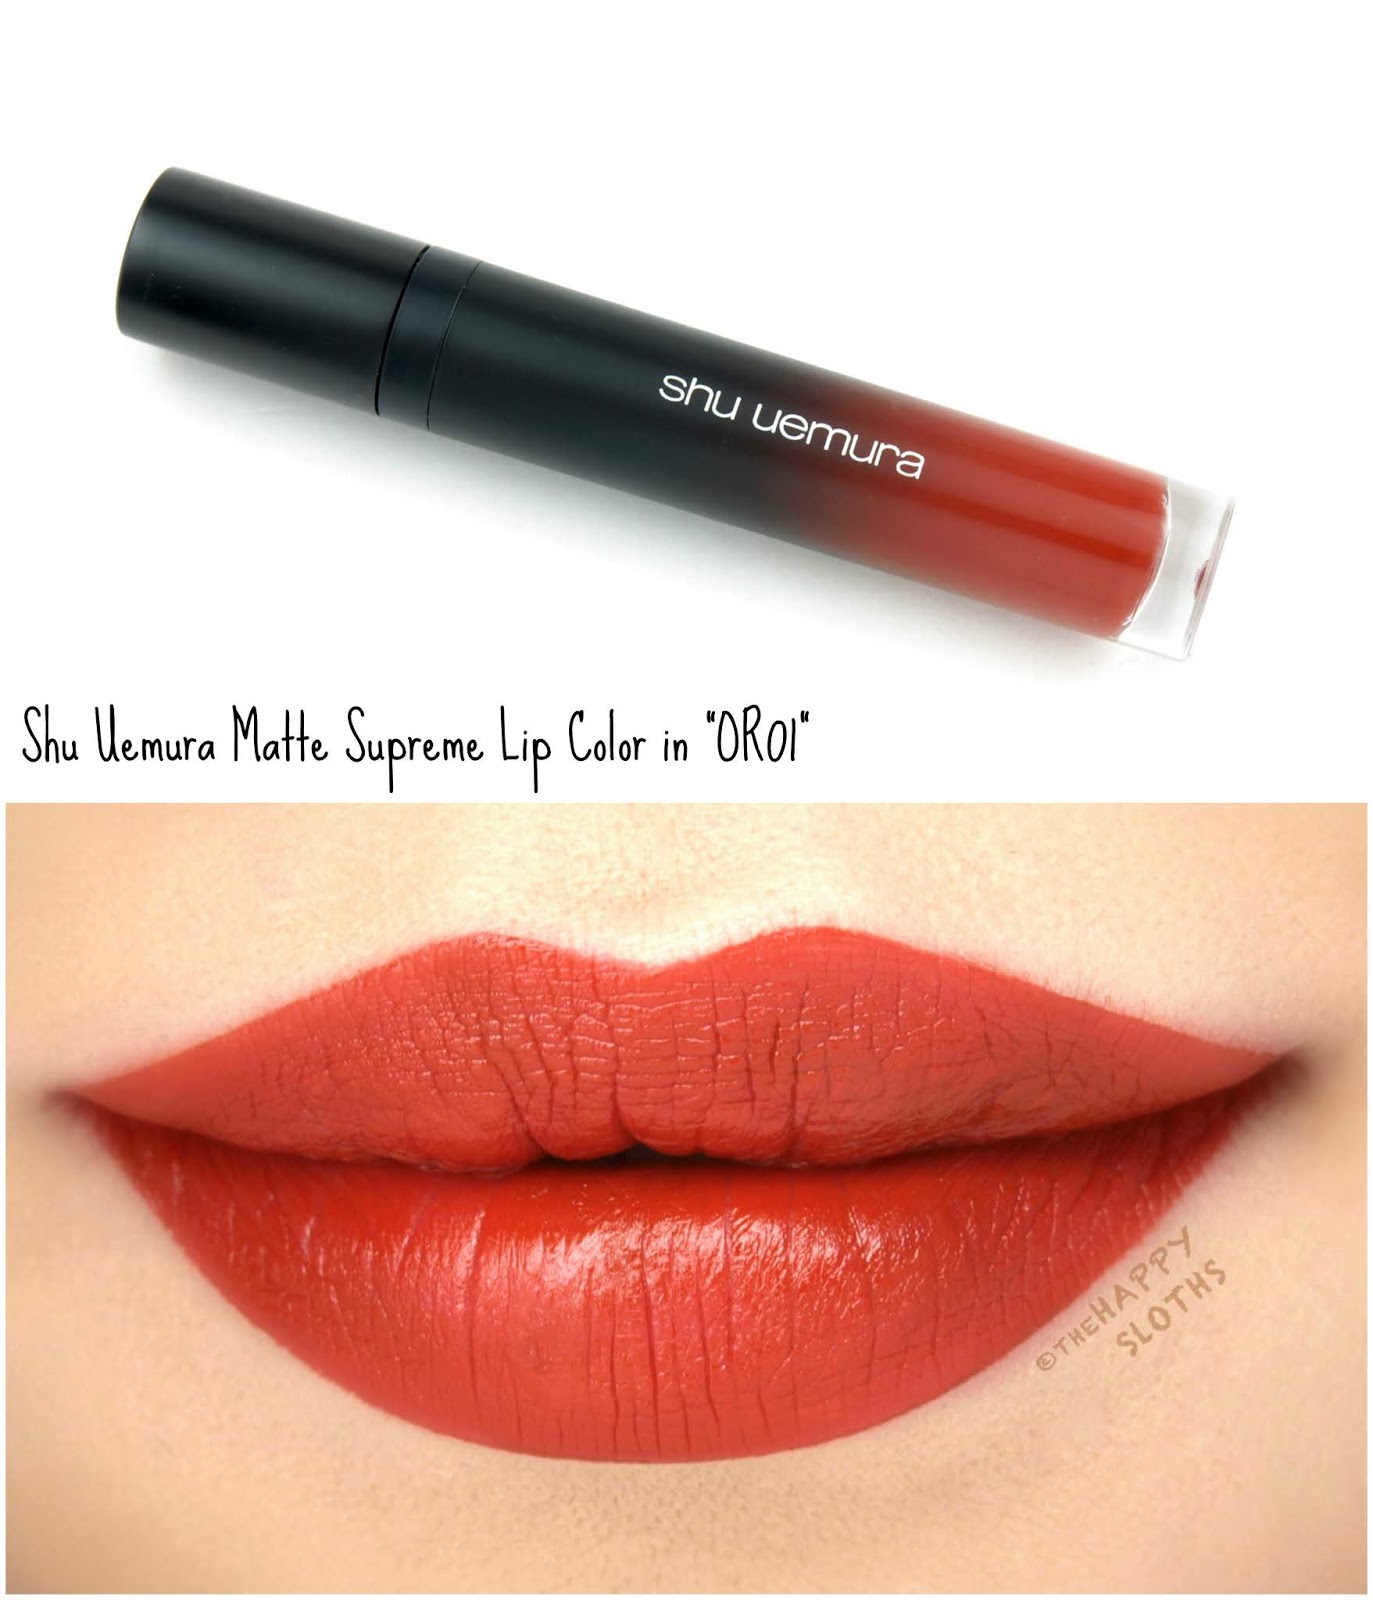 Shu Uemura | Matte Supreme Lip Color in "OR 01": Review and Swatches